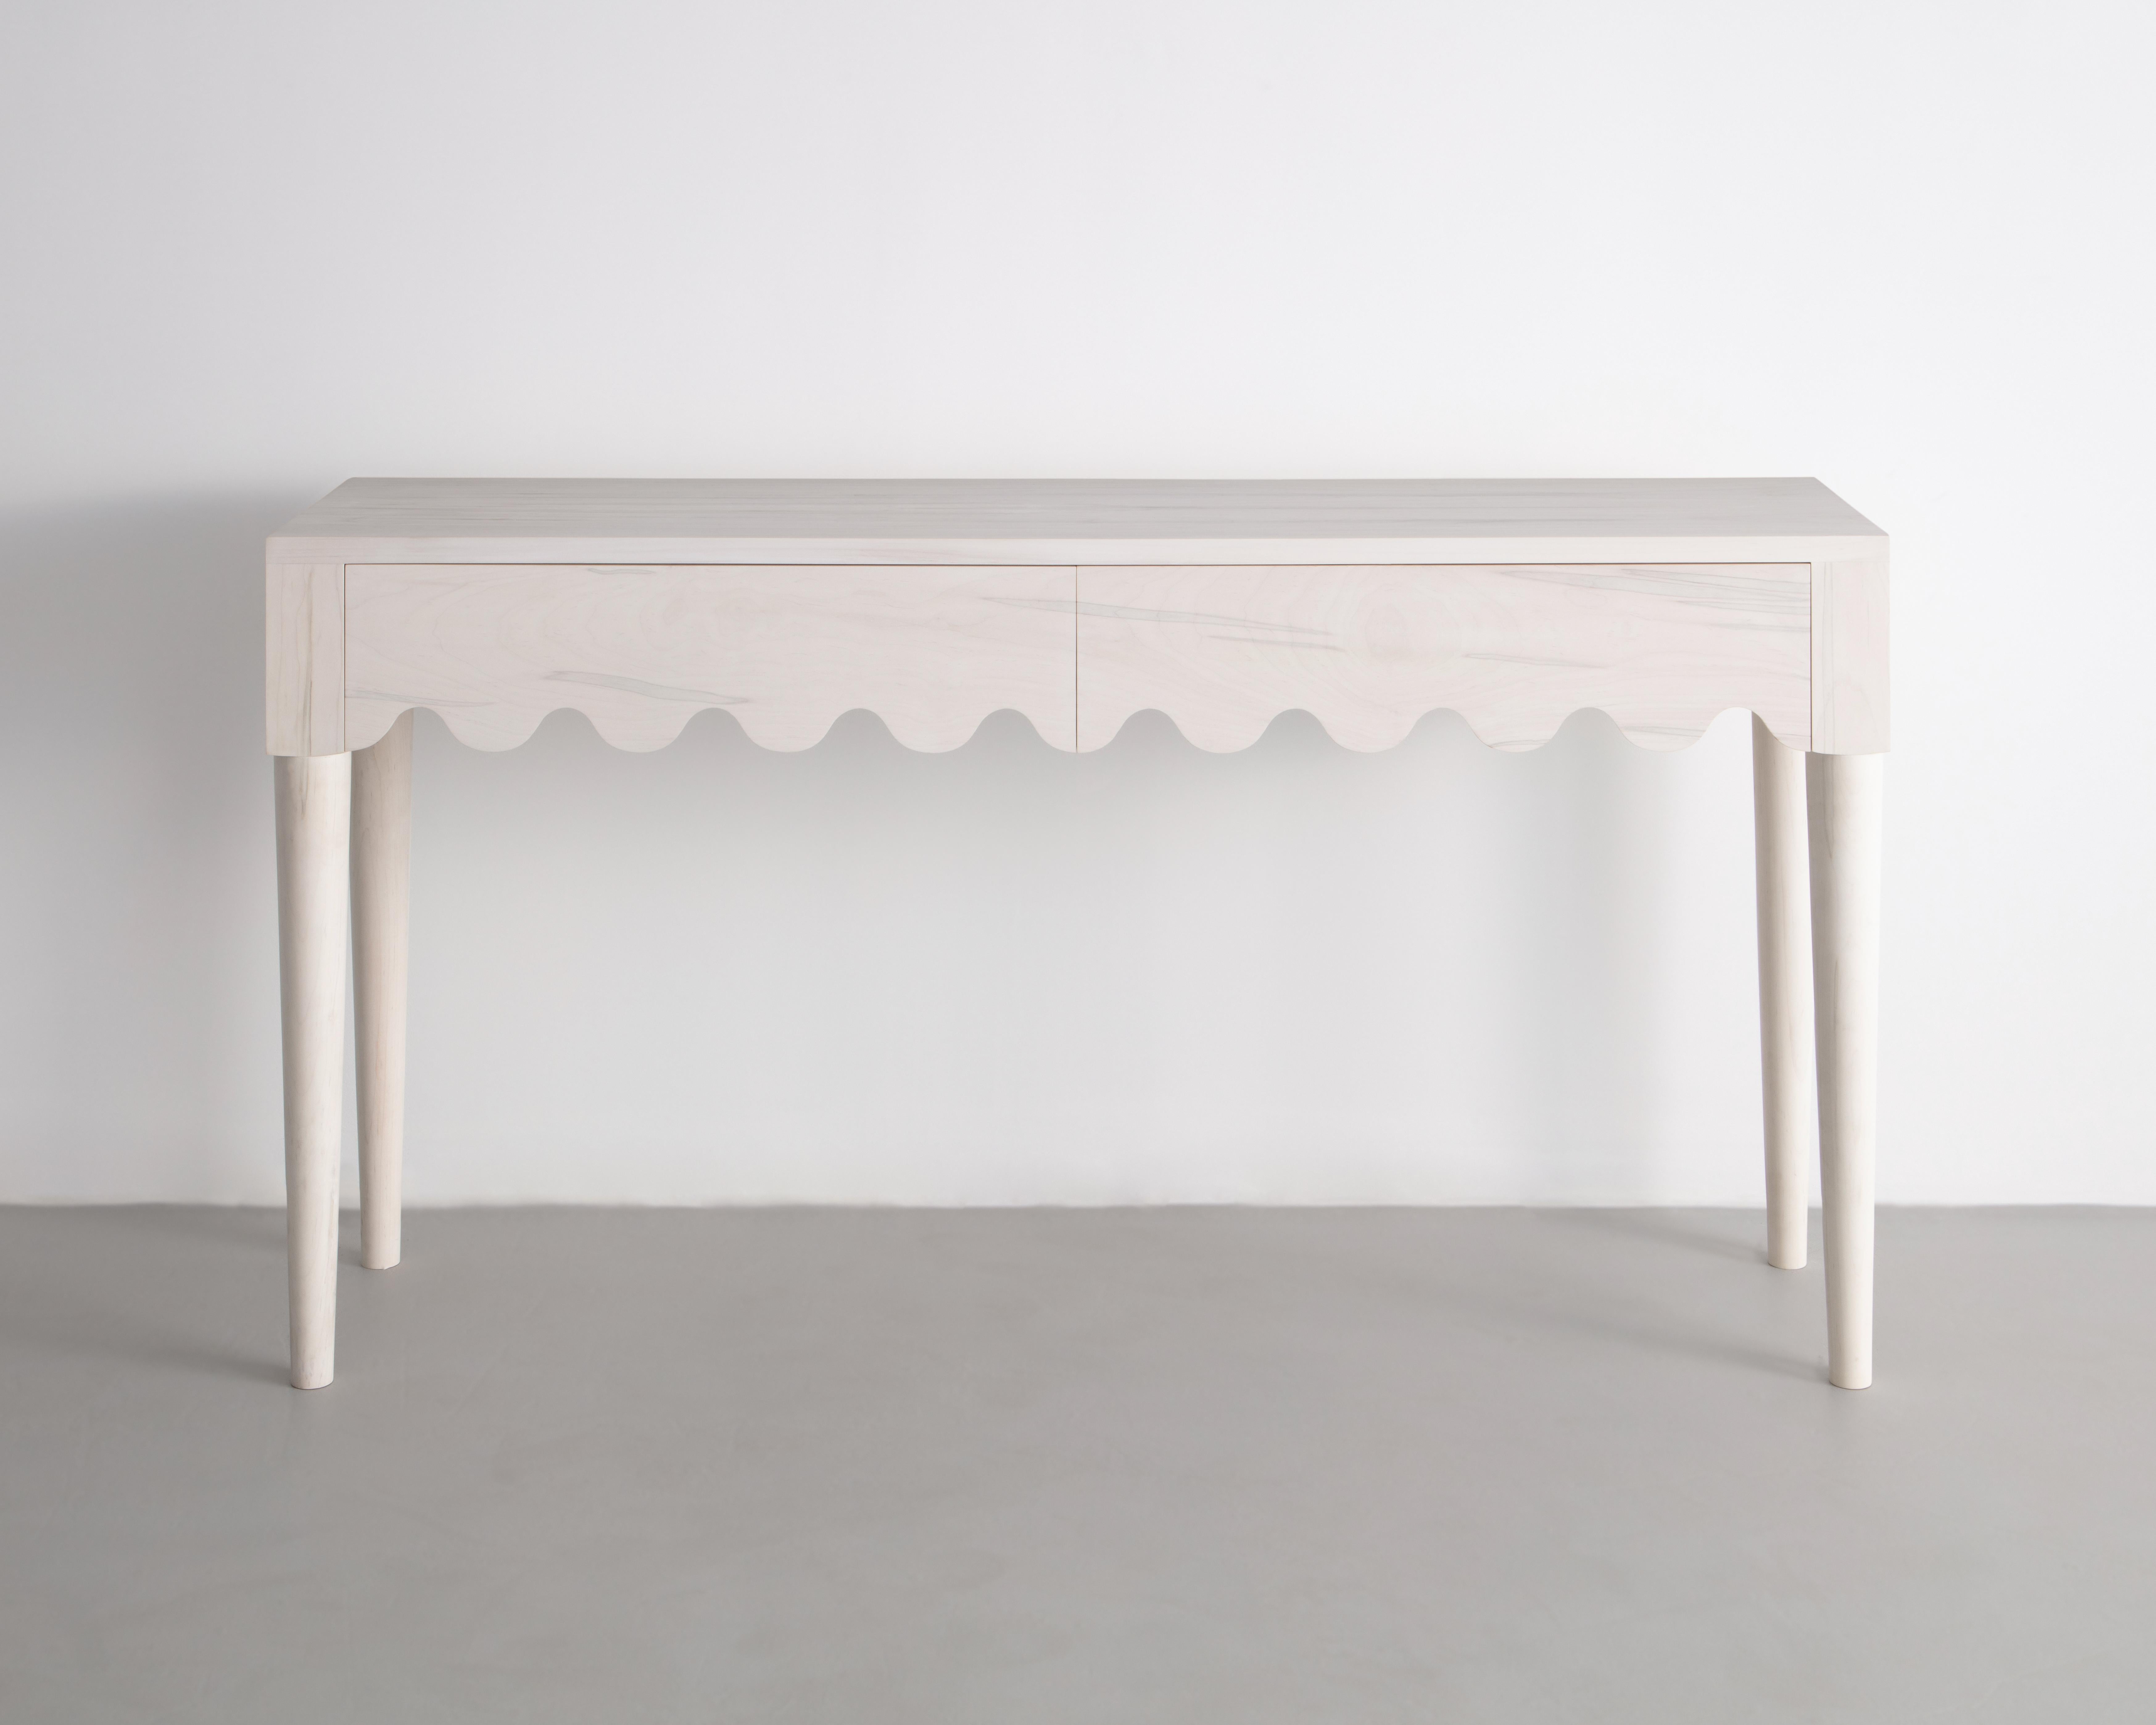 Designed and built in the studio this entryway table features a playful detail that continues along its double drawer faces and seamlessly wraps around its form. 

Made from solid Bleached Maple -inspired by the French mid-century designer Jean